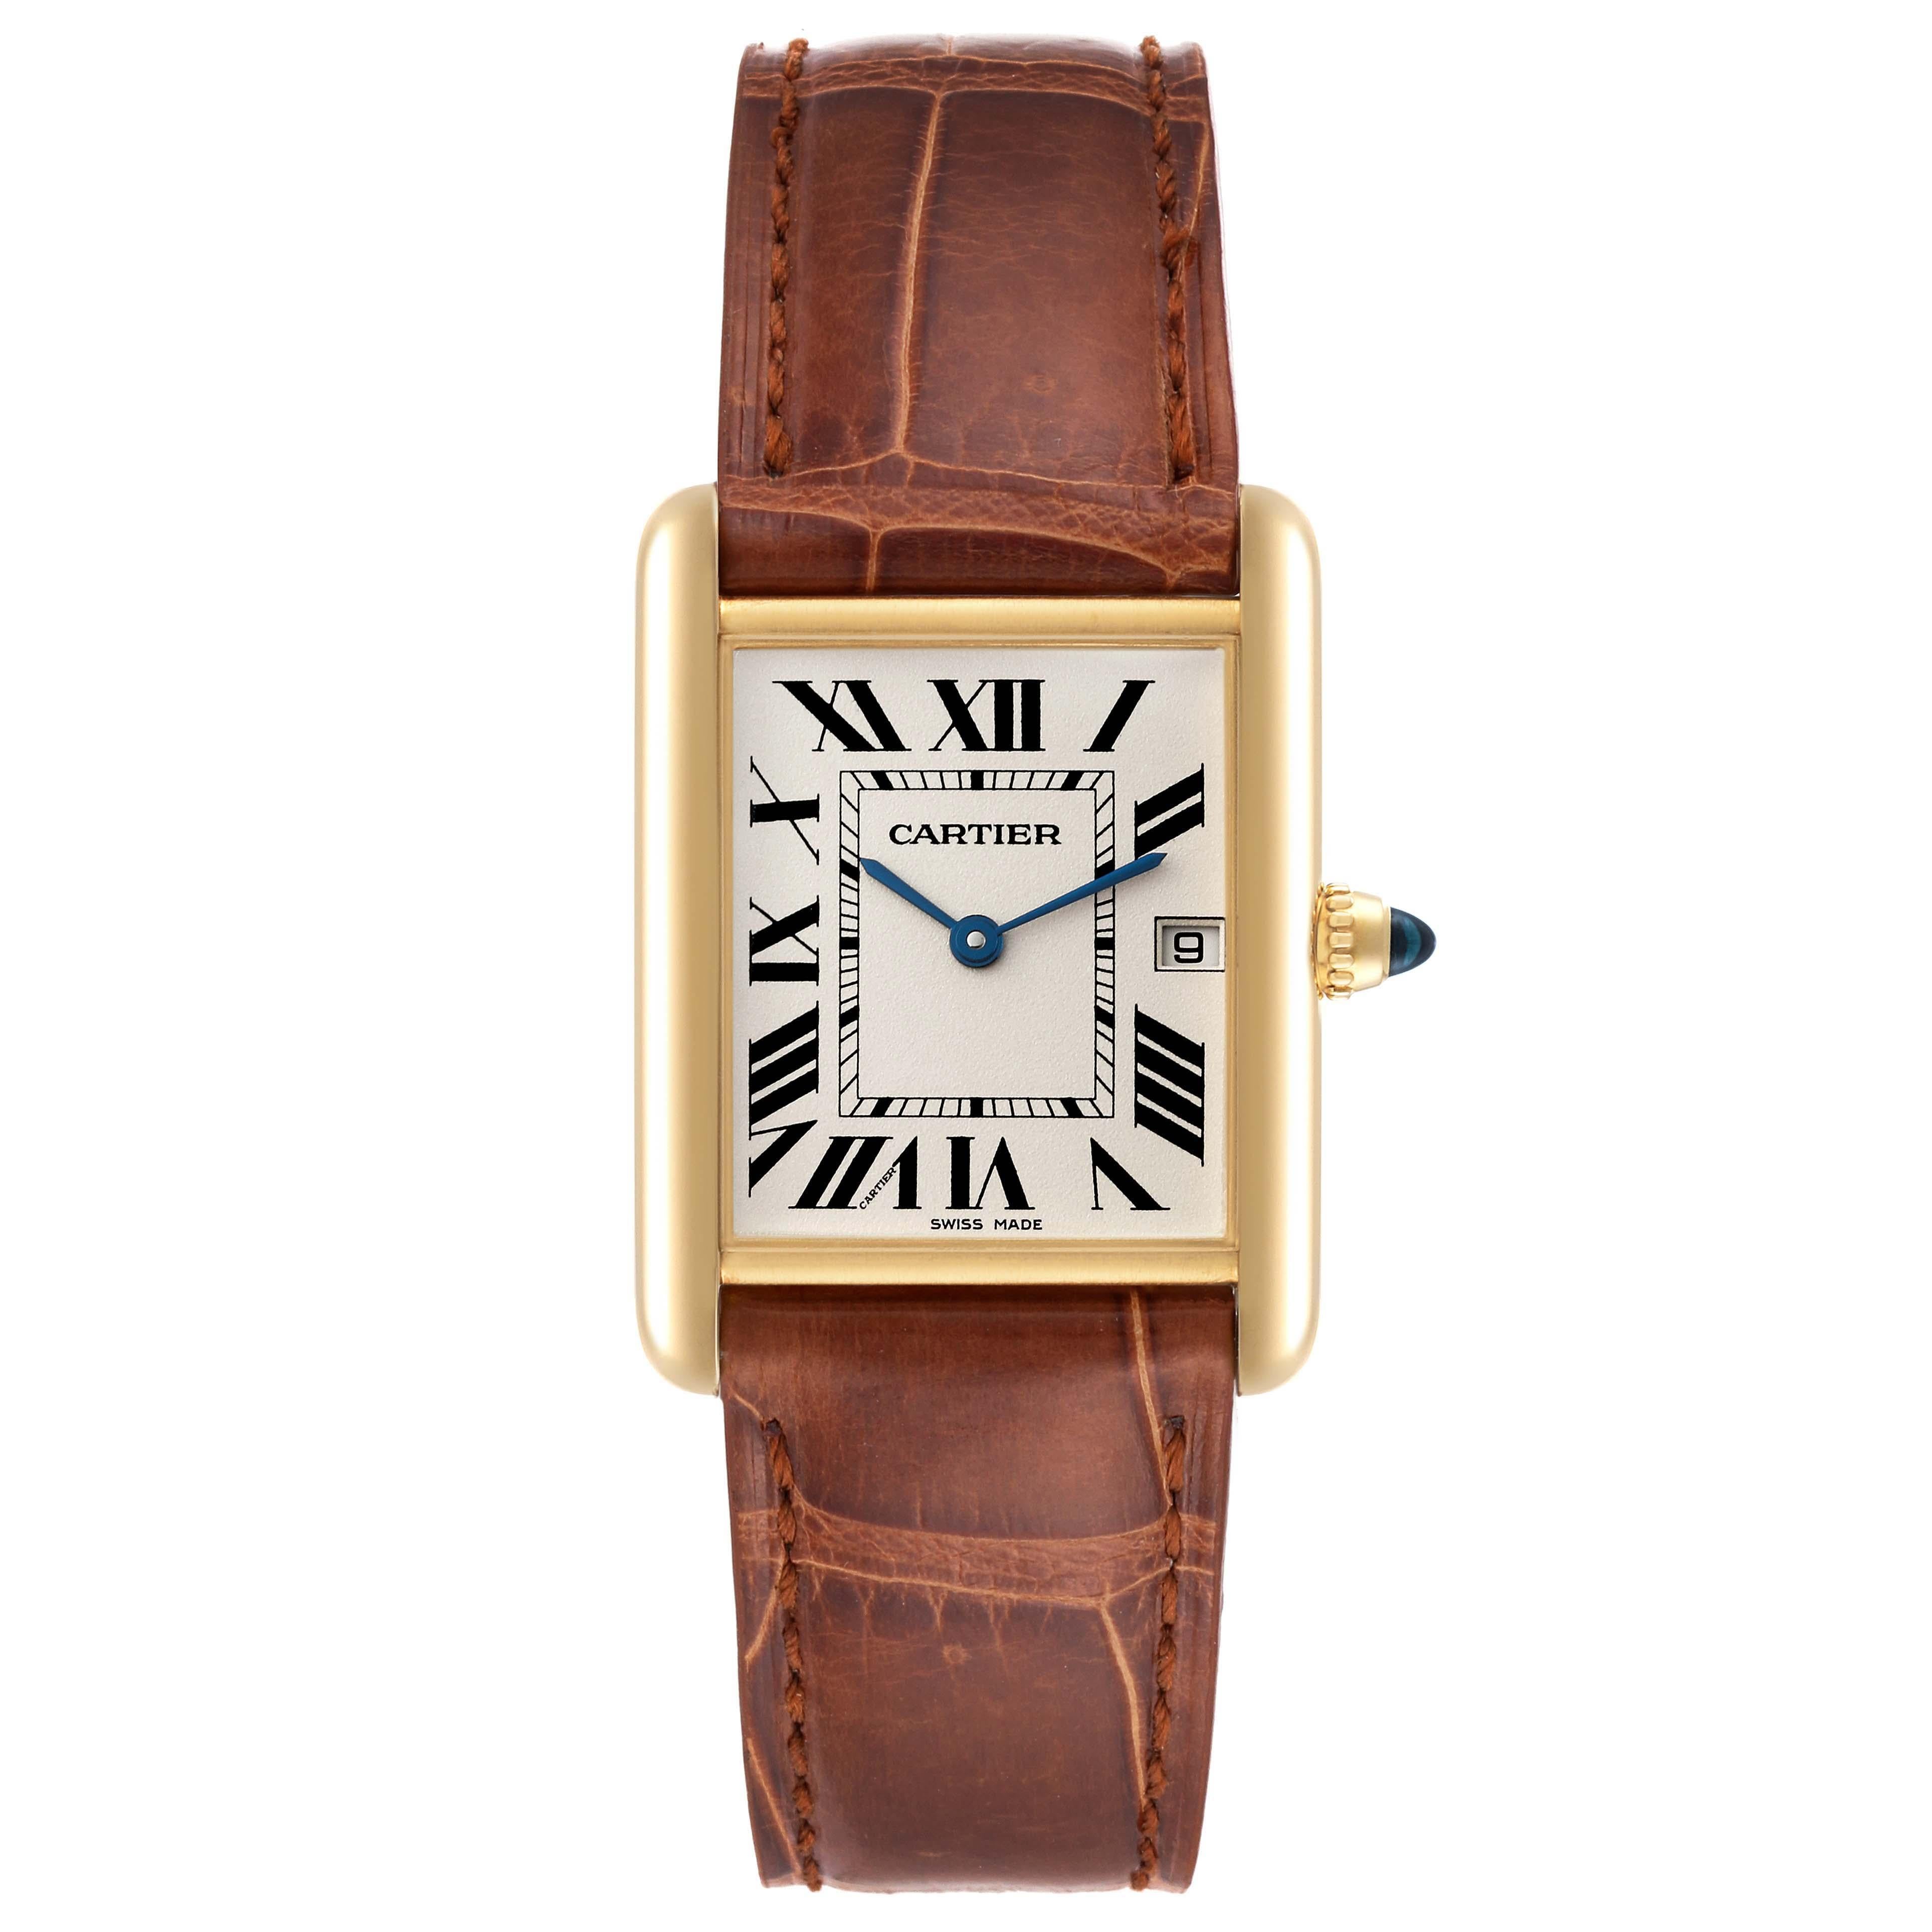 Cartier Tank Louis Yellow Gold Brown Leather Strap Mens Watch W1529756 Card. Quartz movement. 18k yellow gold case 25.0 x 33.0 mm. Circular grained crown set with a blue sapphire cabochon. . Mineral crystal. Silvered opaline dial with black Roman